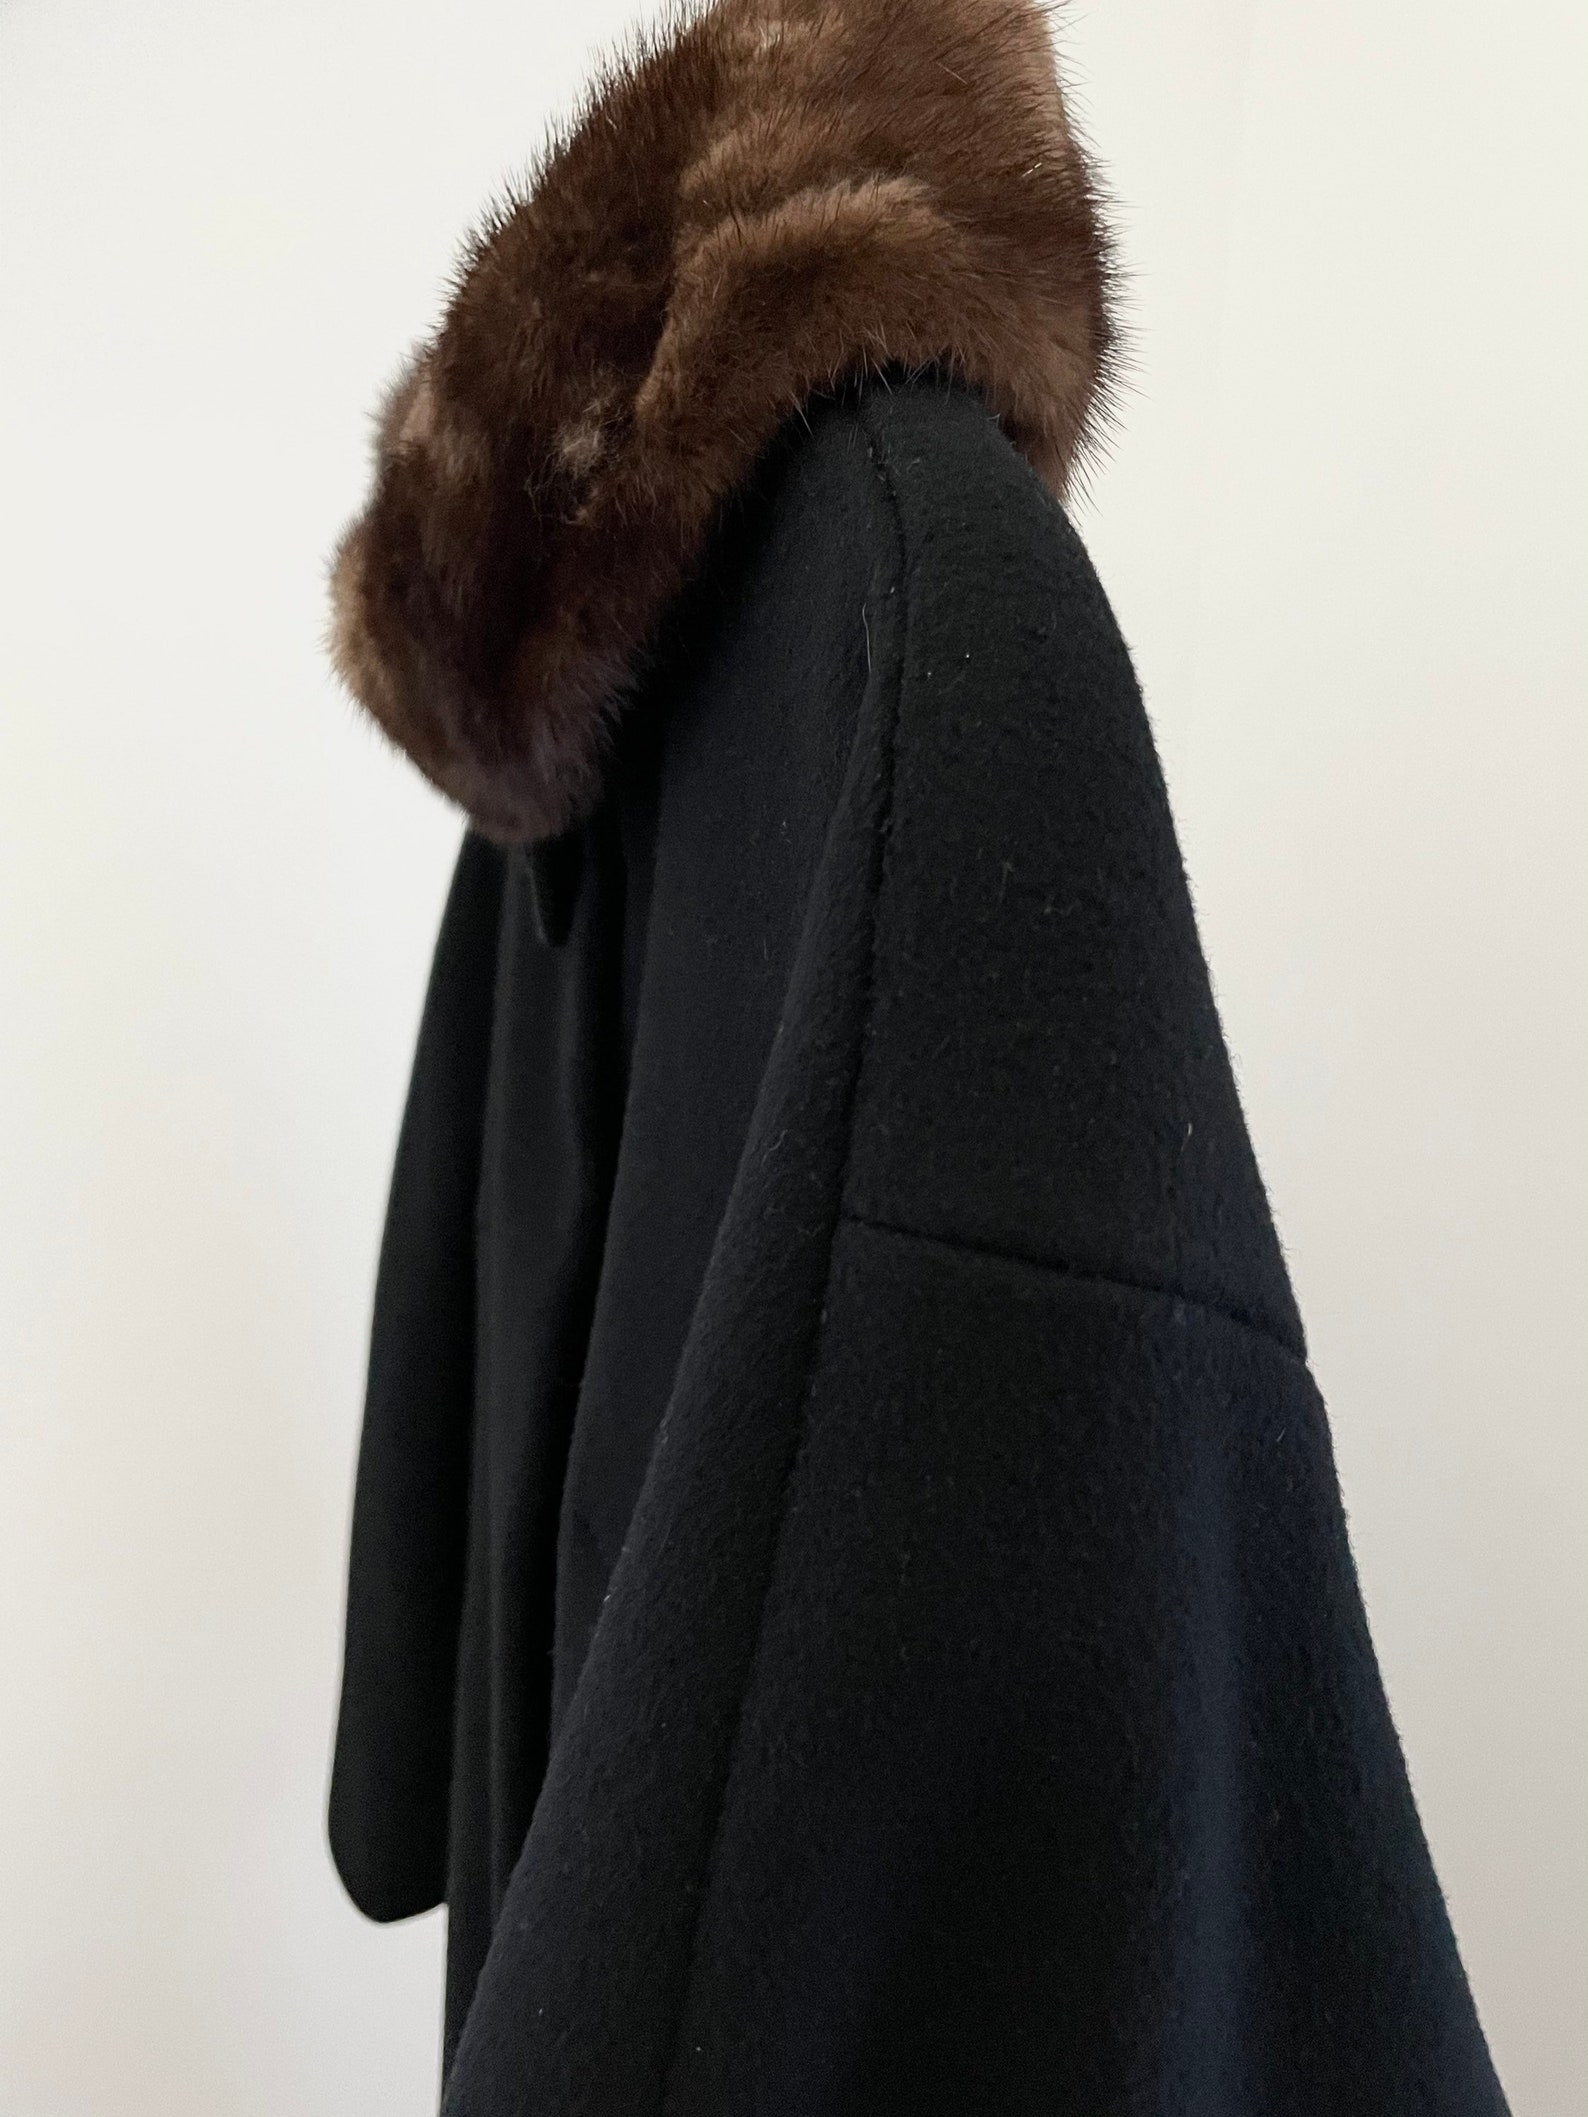 DE PINNA Impeccable 1950s Black Wool Coat With Fur Collar - Etsy